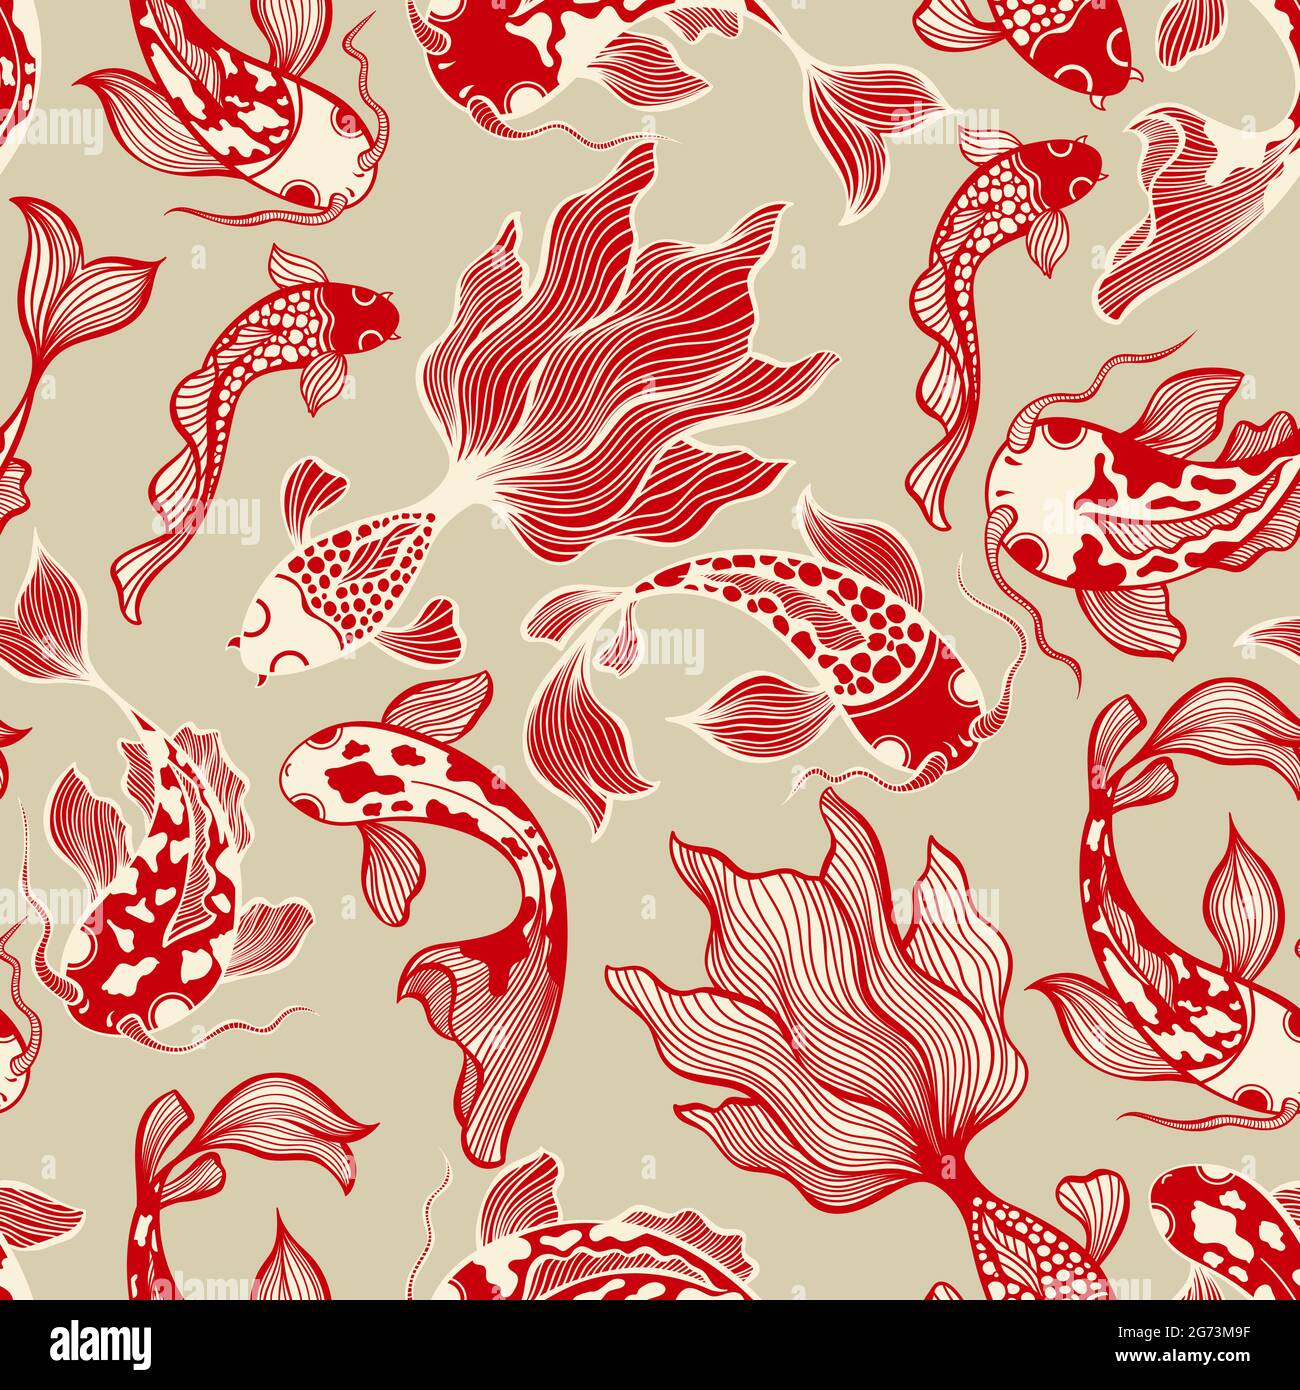 Japanese Koi Fish Vector Seamless Pattern in Neutral Colors Stock Vector